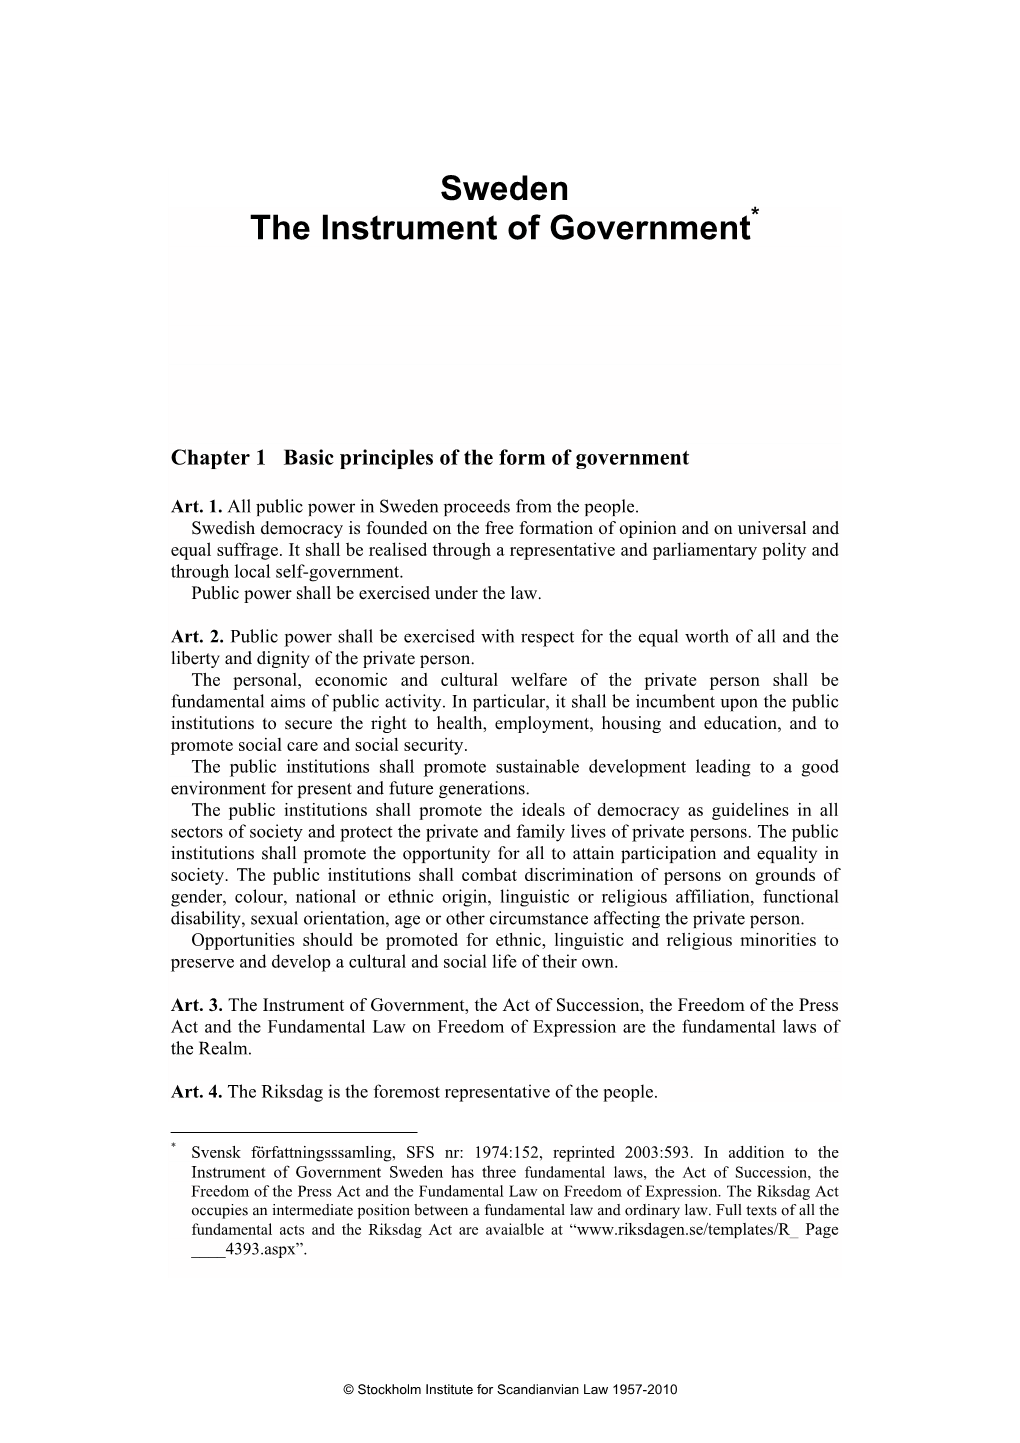 Sweden the Instrument of Government*